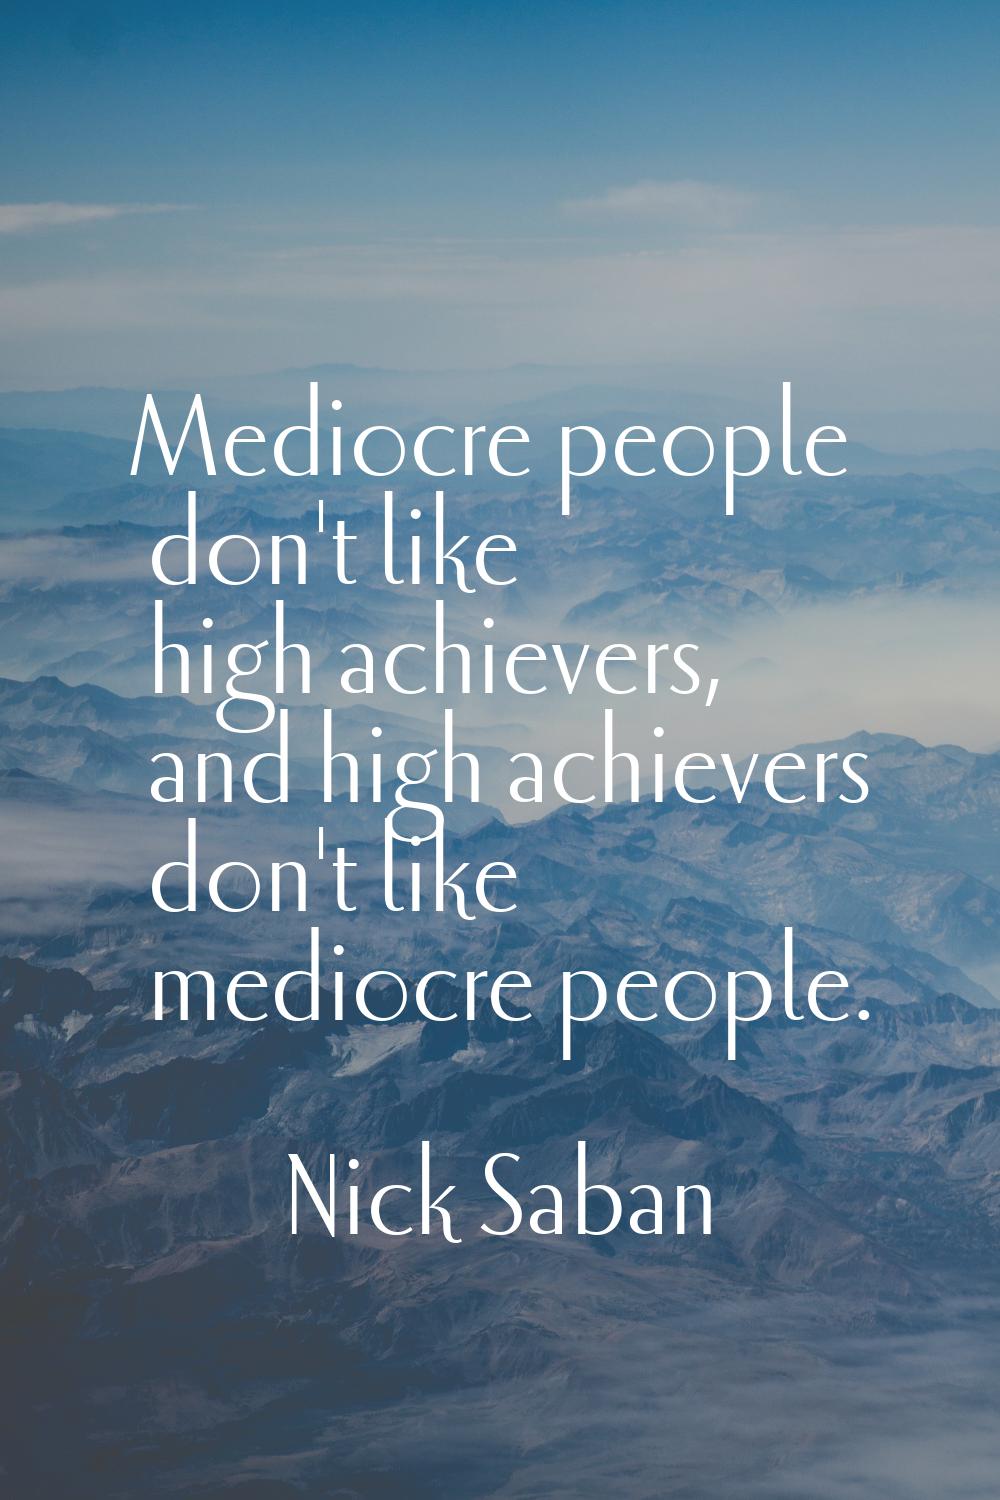 Mediocre people don't like high achievers, and high achievers don't like mediocre people.